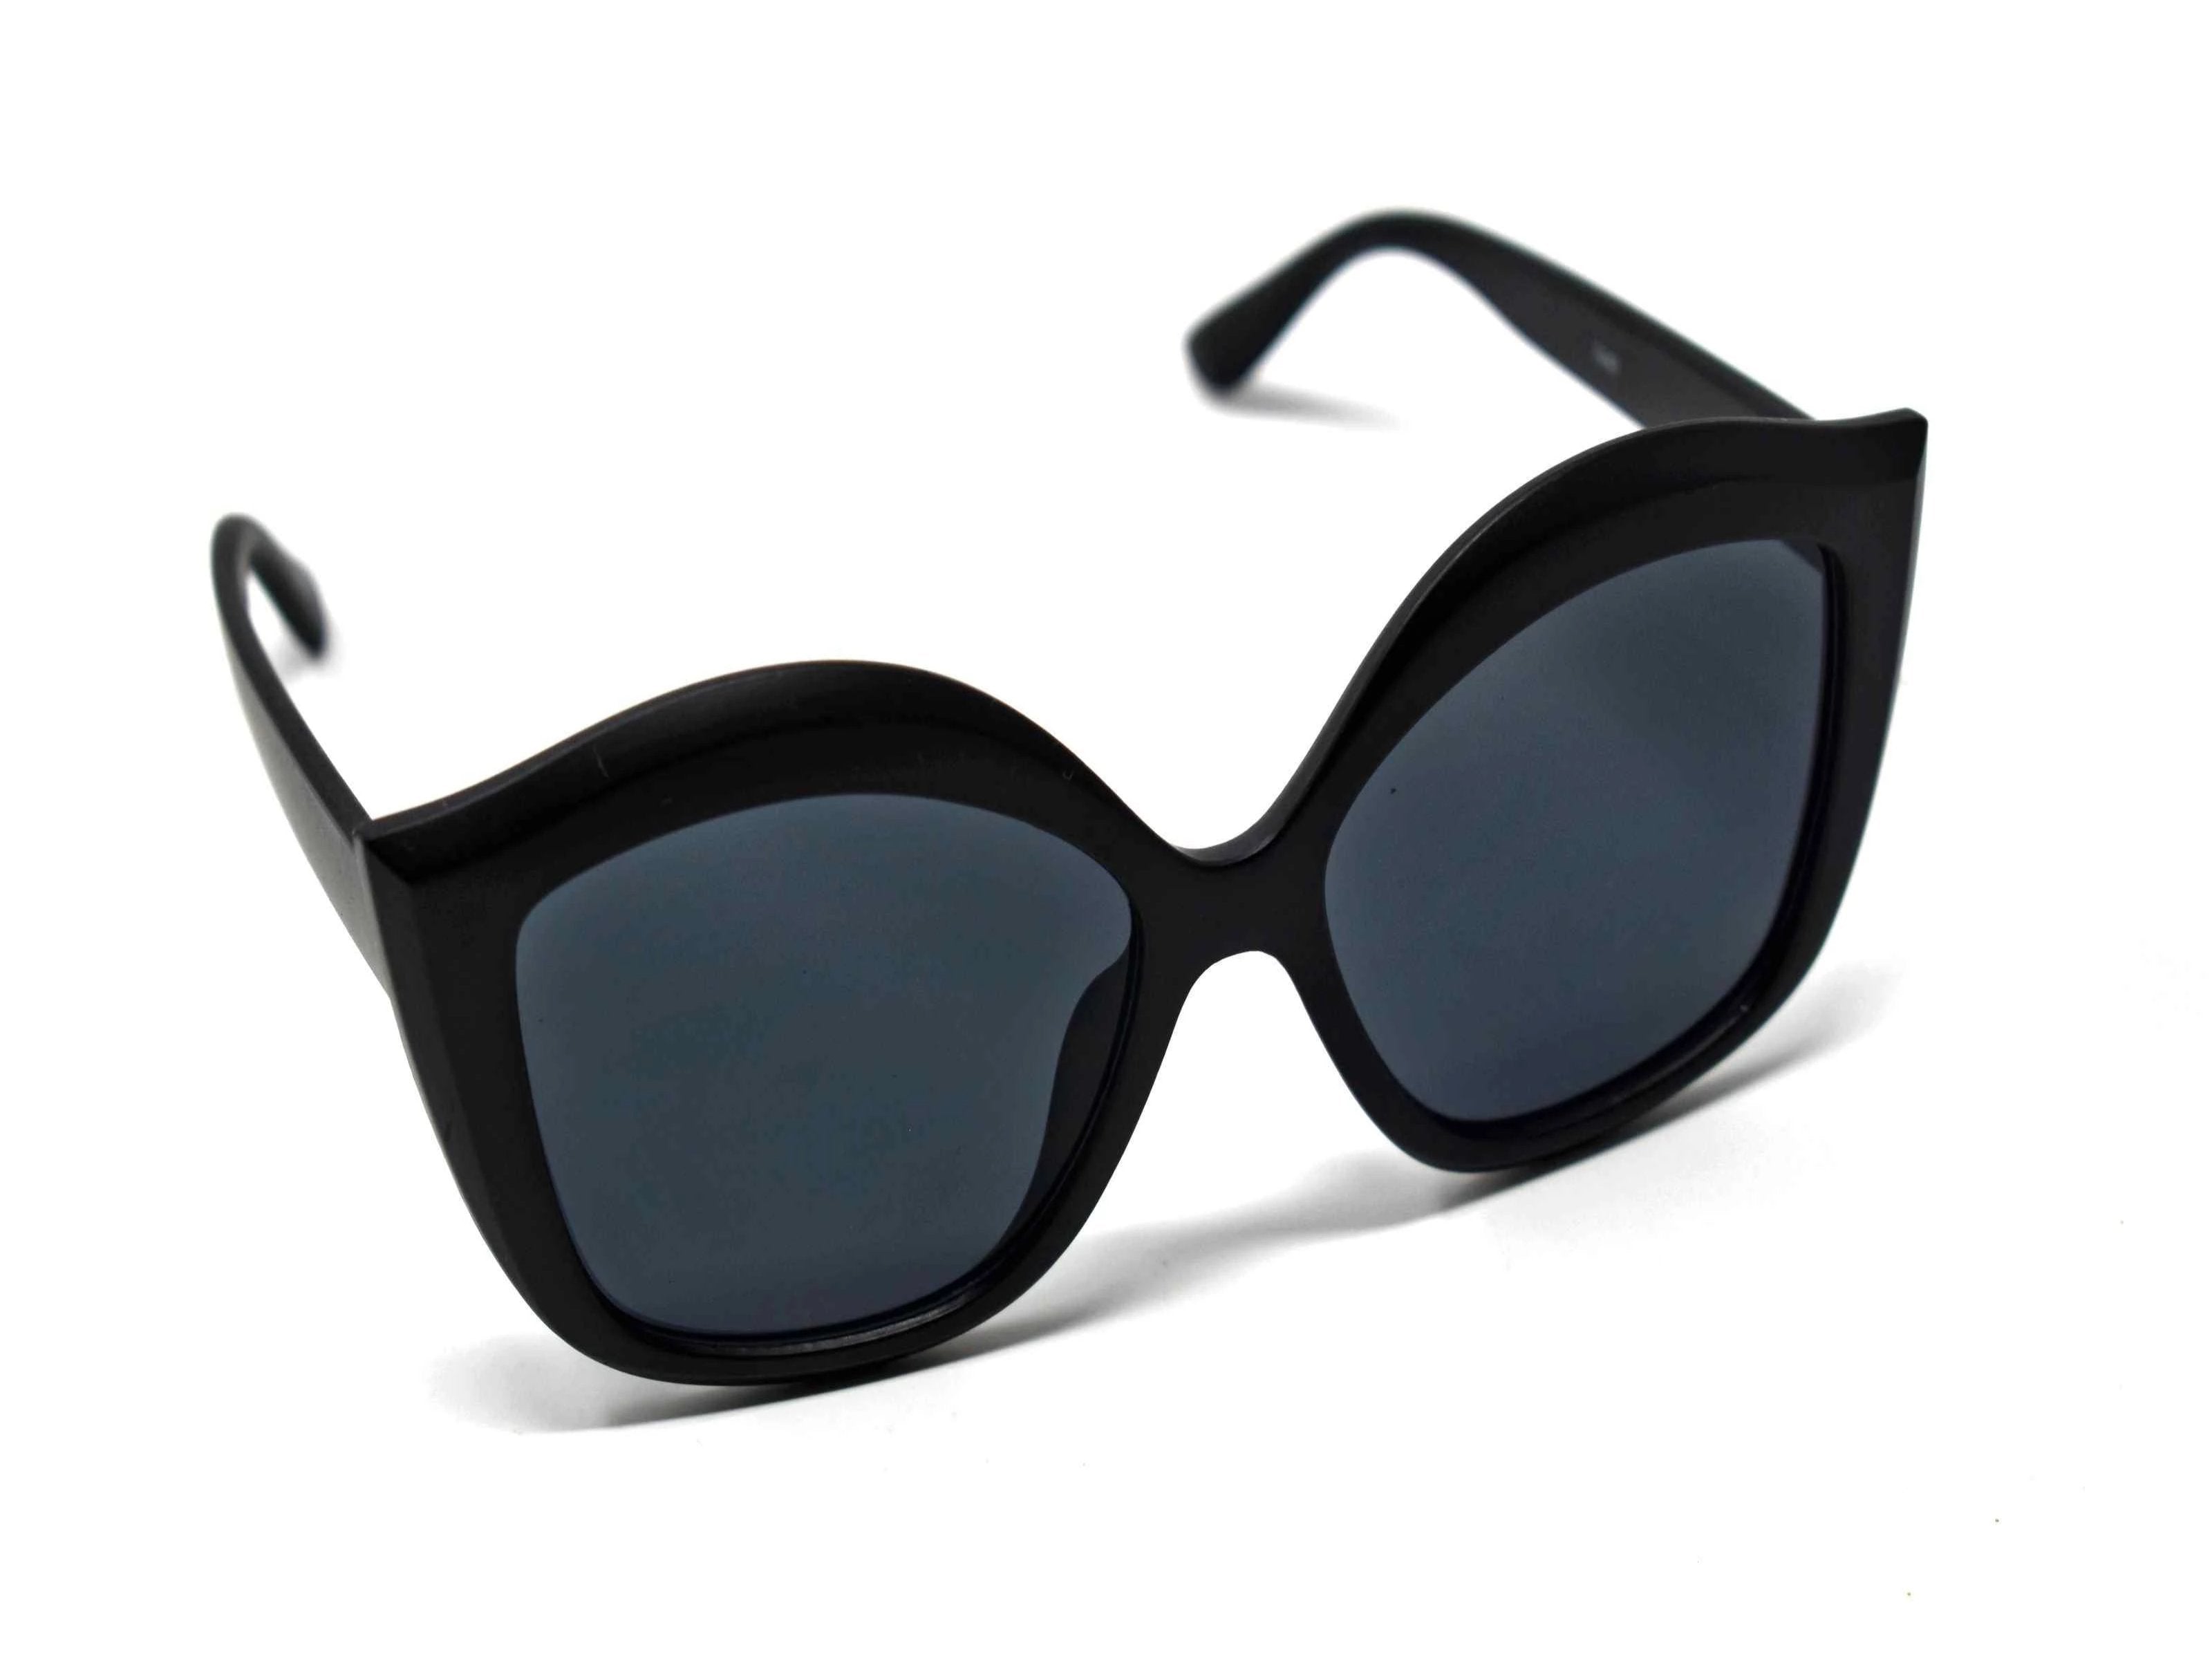 Retro glam has come again with our Petal matte black cat eye frame sunglasses with a black lens.